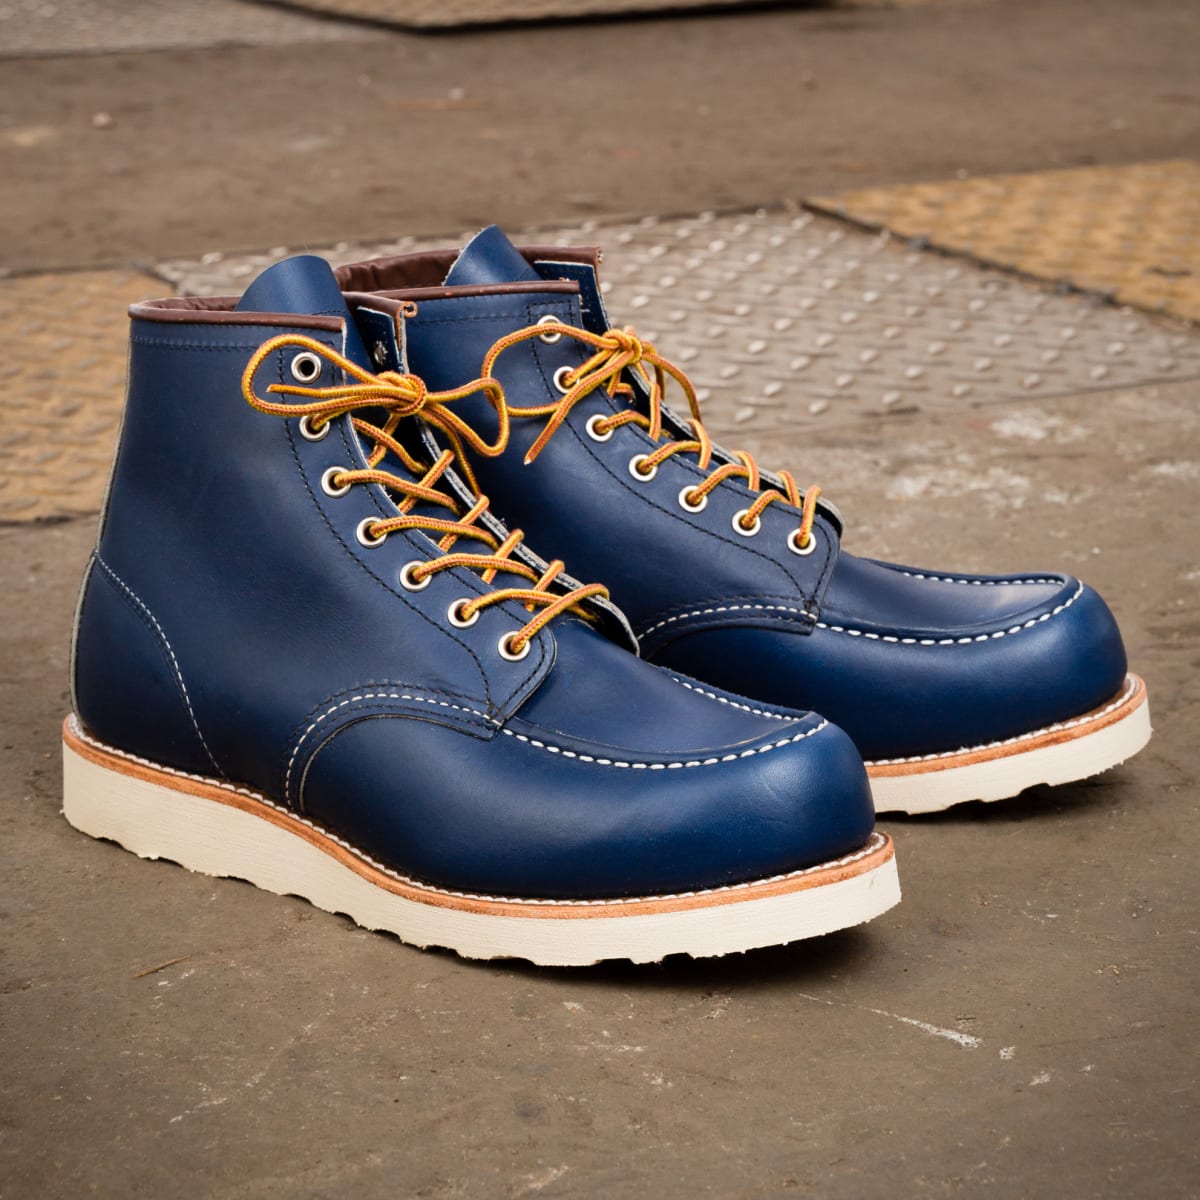 Red Wing Heritage brightens up its lineup with an Indigo leather